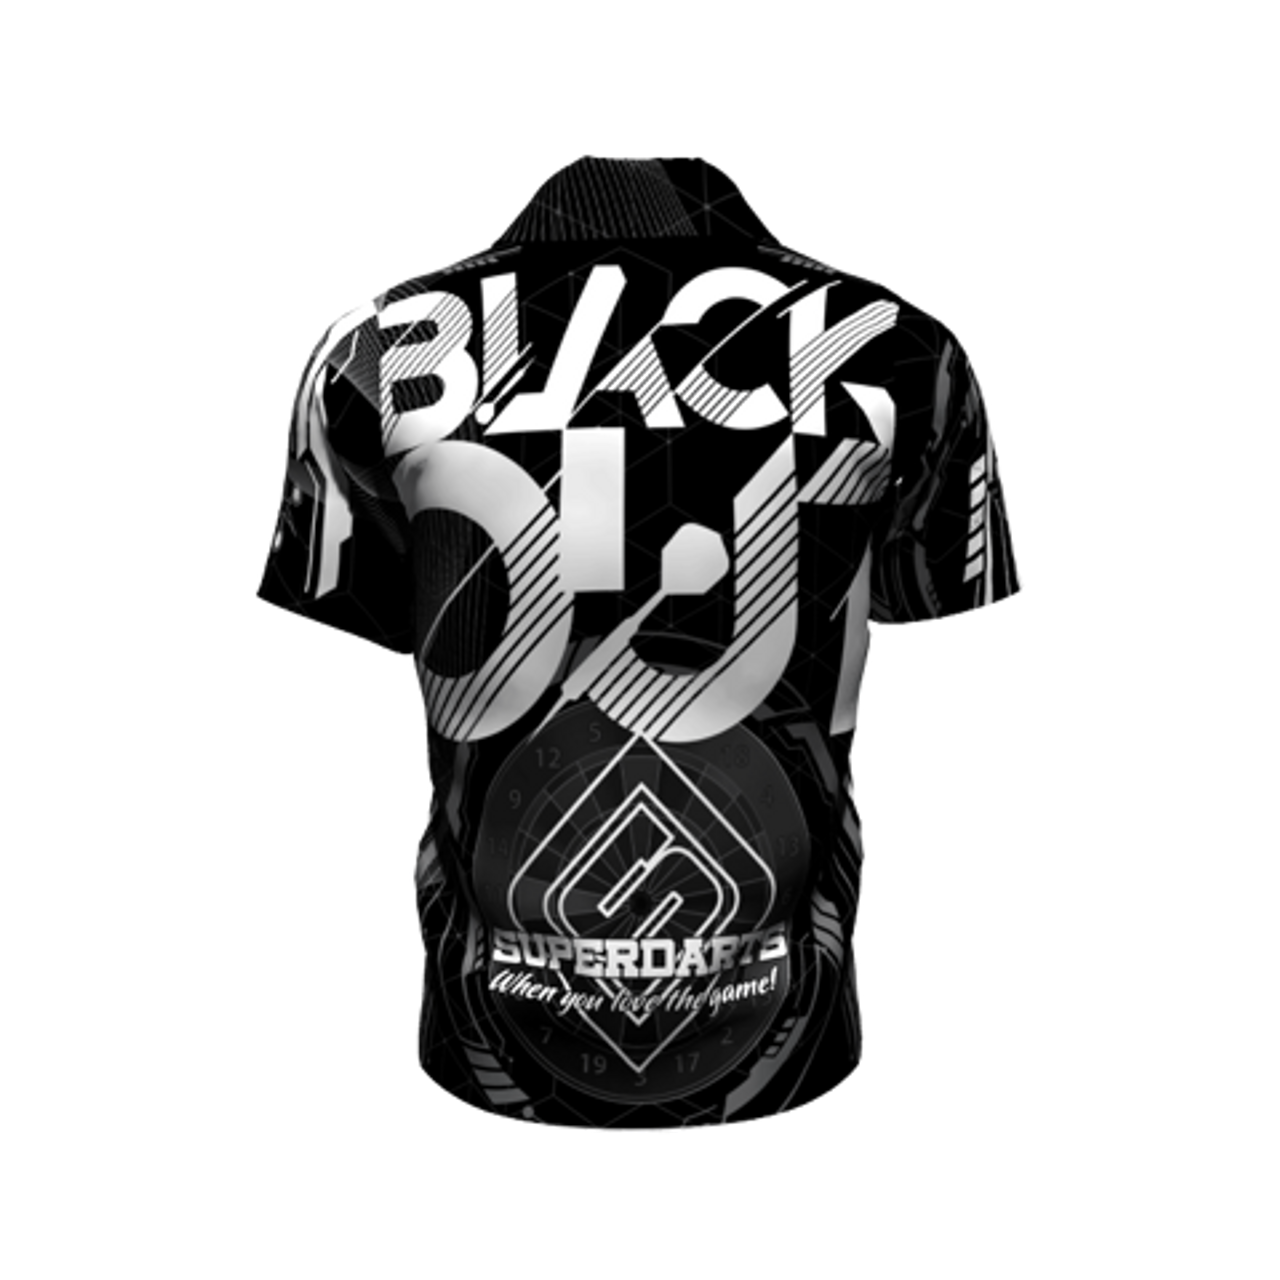 BARRACUDA BLACKOUT NIGHT FEATURING GIVEAWAY JERSEY SET FOR 3/10